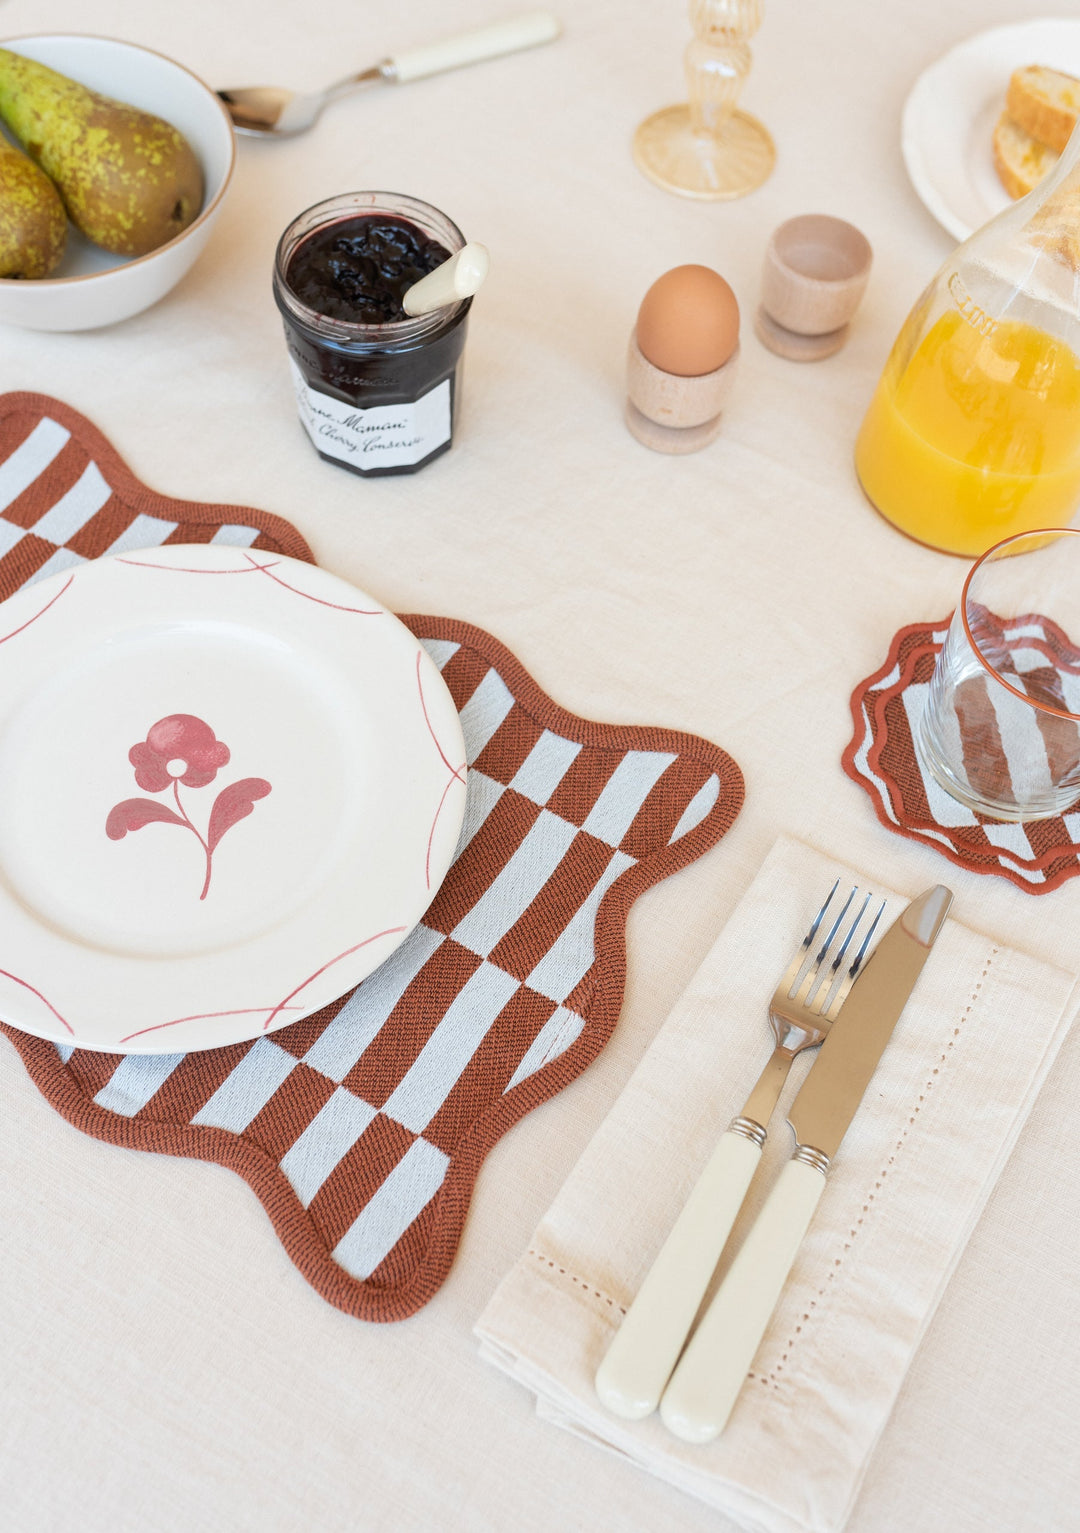 Rust Checkerboard Cotton Placemats Set of 2